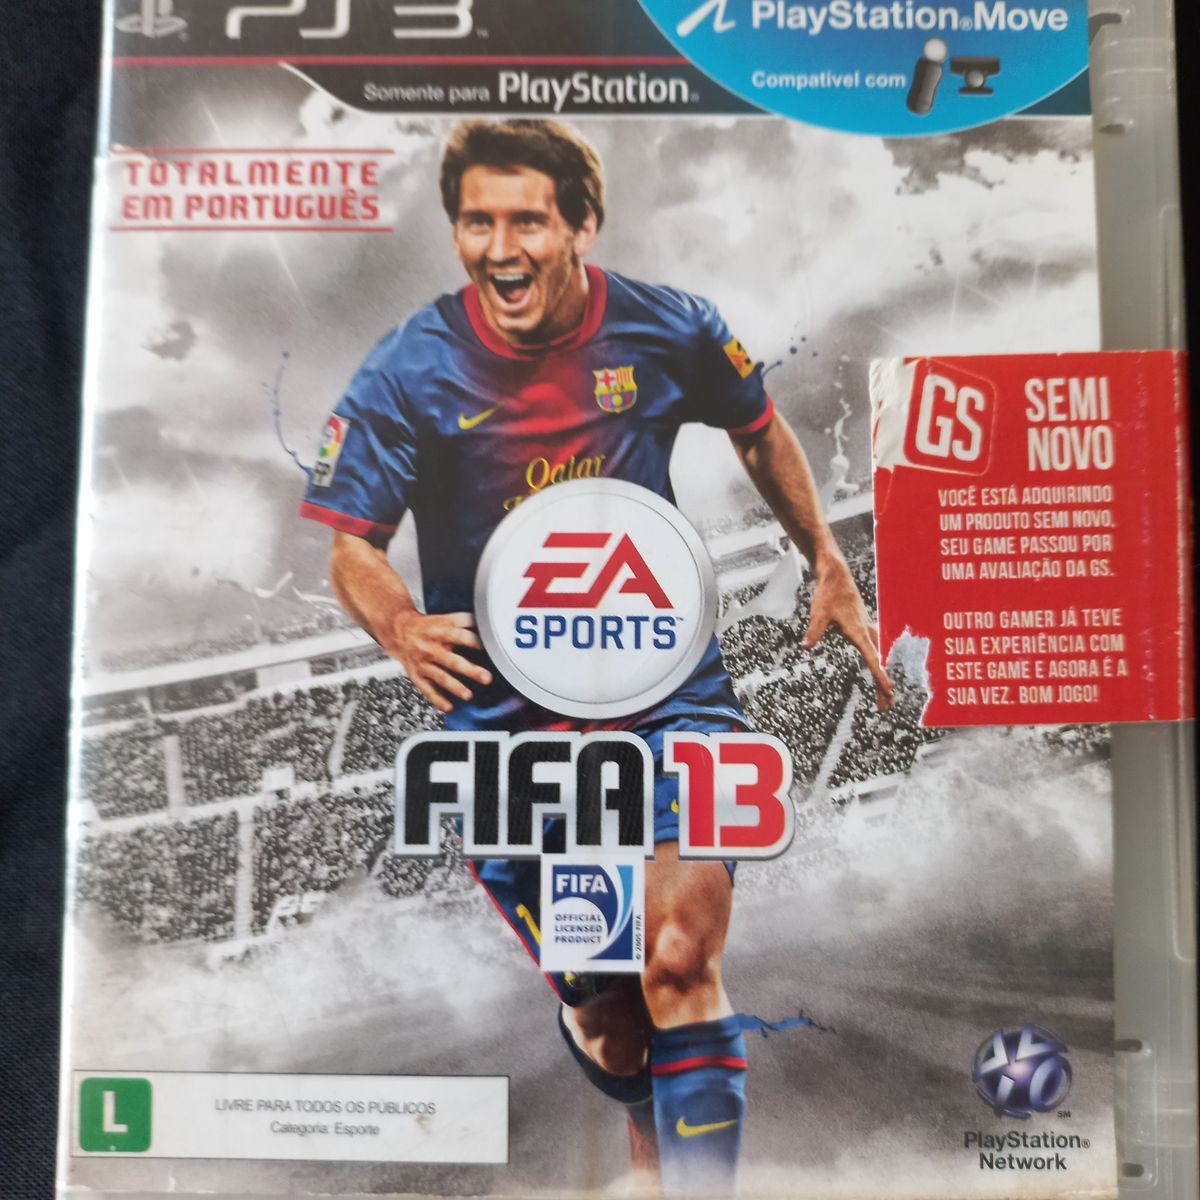 How Different is to play FIFA 14 on Playstation 3 and on PS 4 ?